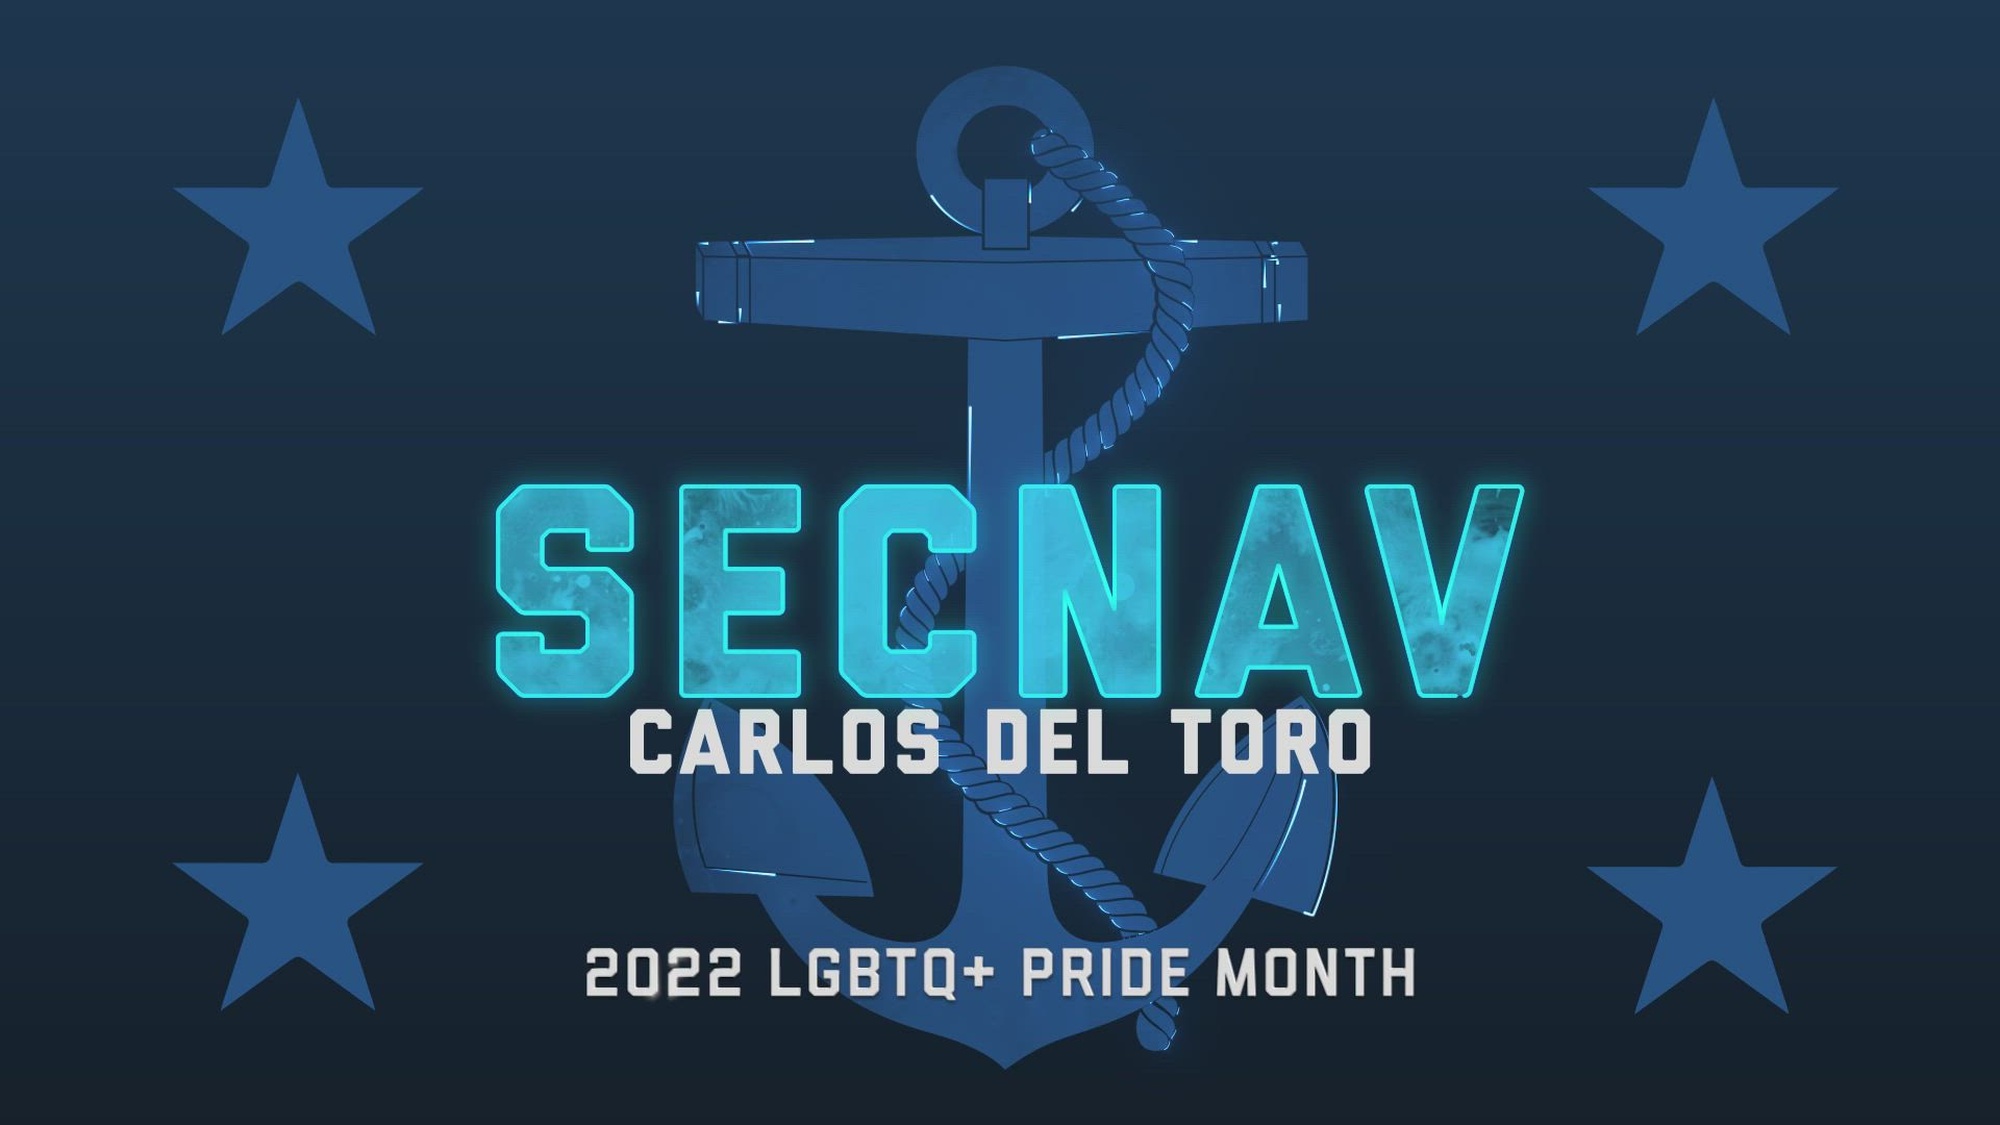 WASHINGTON (June 28, 2022) — Secretary of the Navy Carlos Del Toro delivers a message for Lesbian, Gay, Bisexual, Transgender, Queer (LGBTQ+) Pride Month. (U.S. Navy video by Mass Communication Specialist 2nd Class T. Logan Keown/Released)